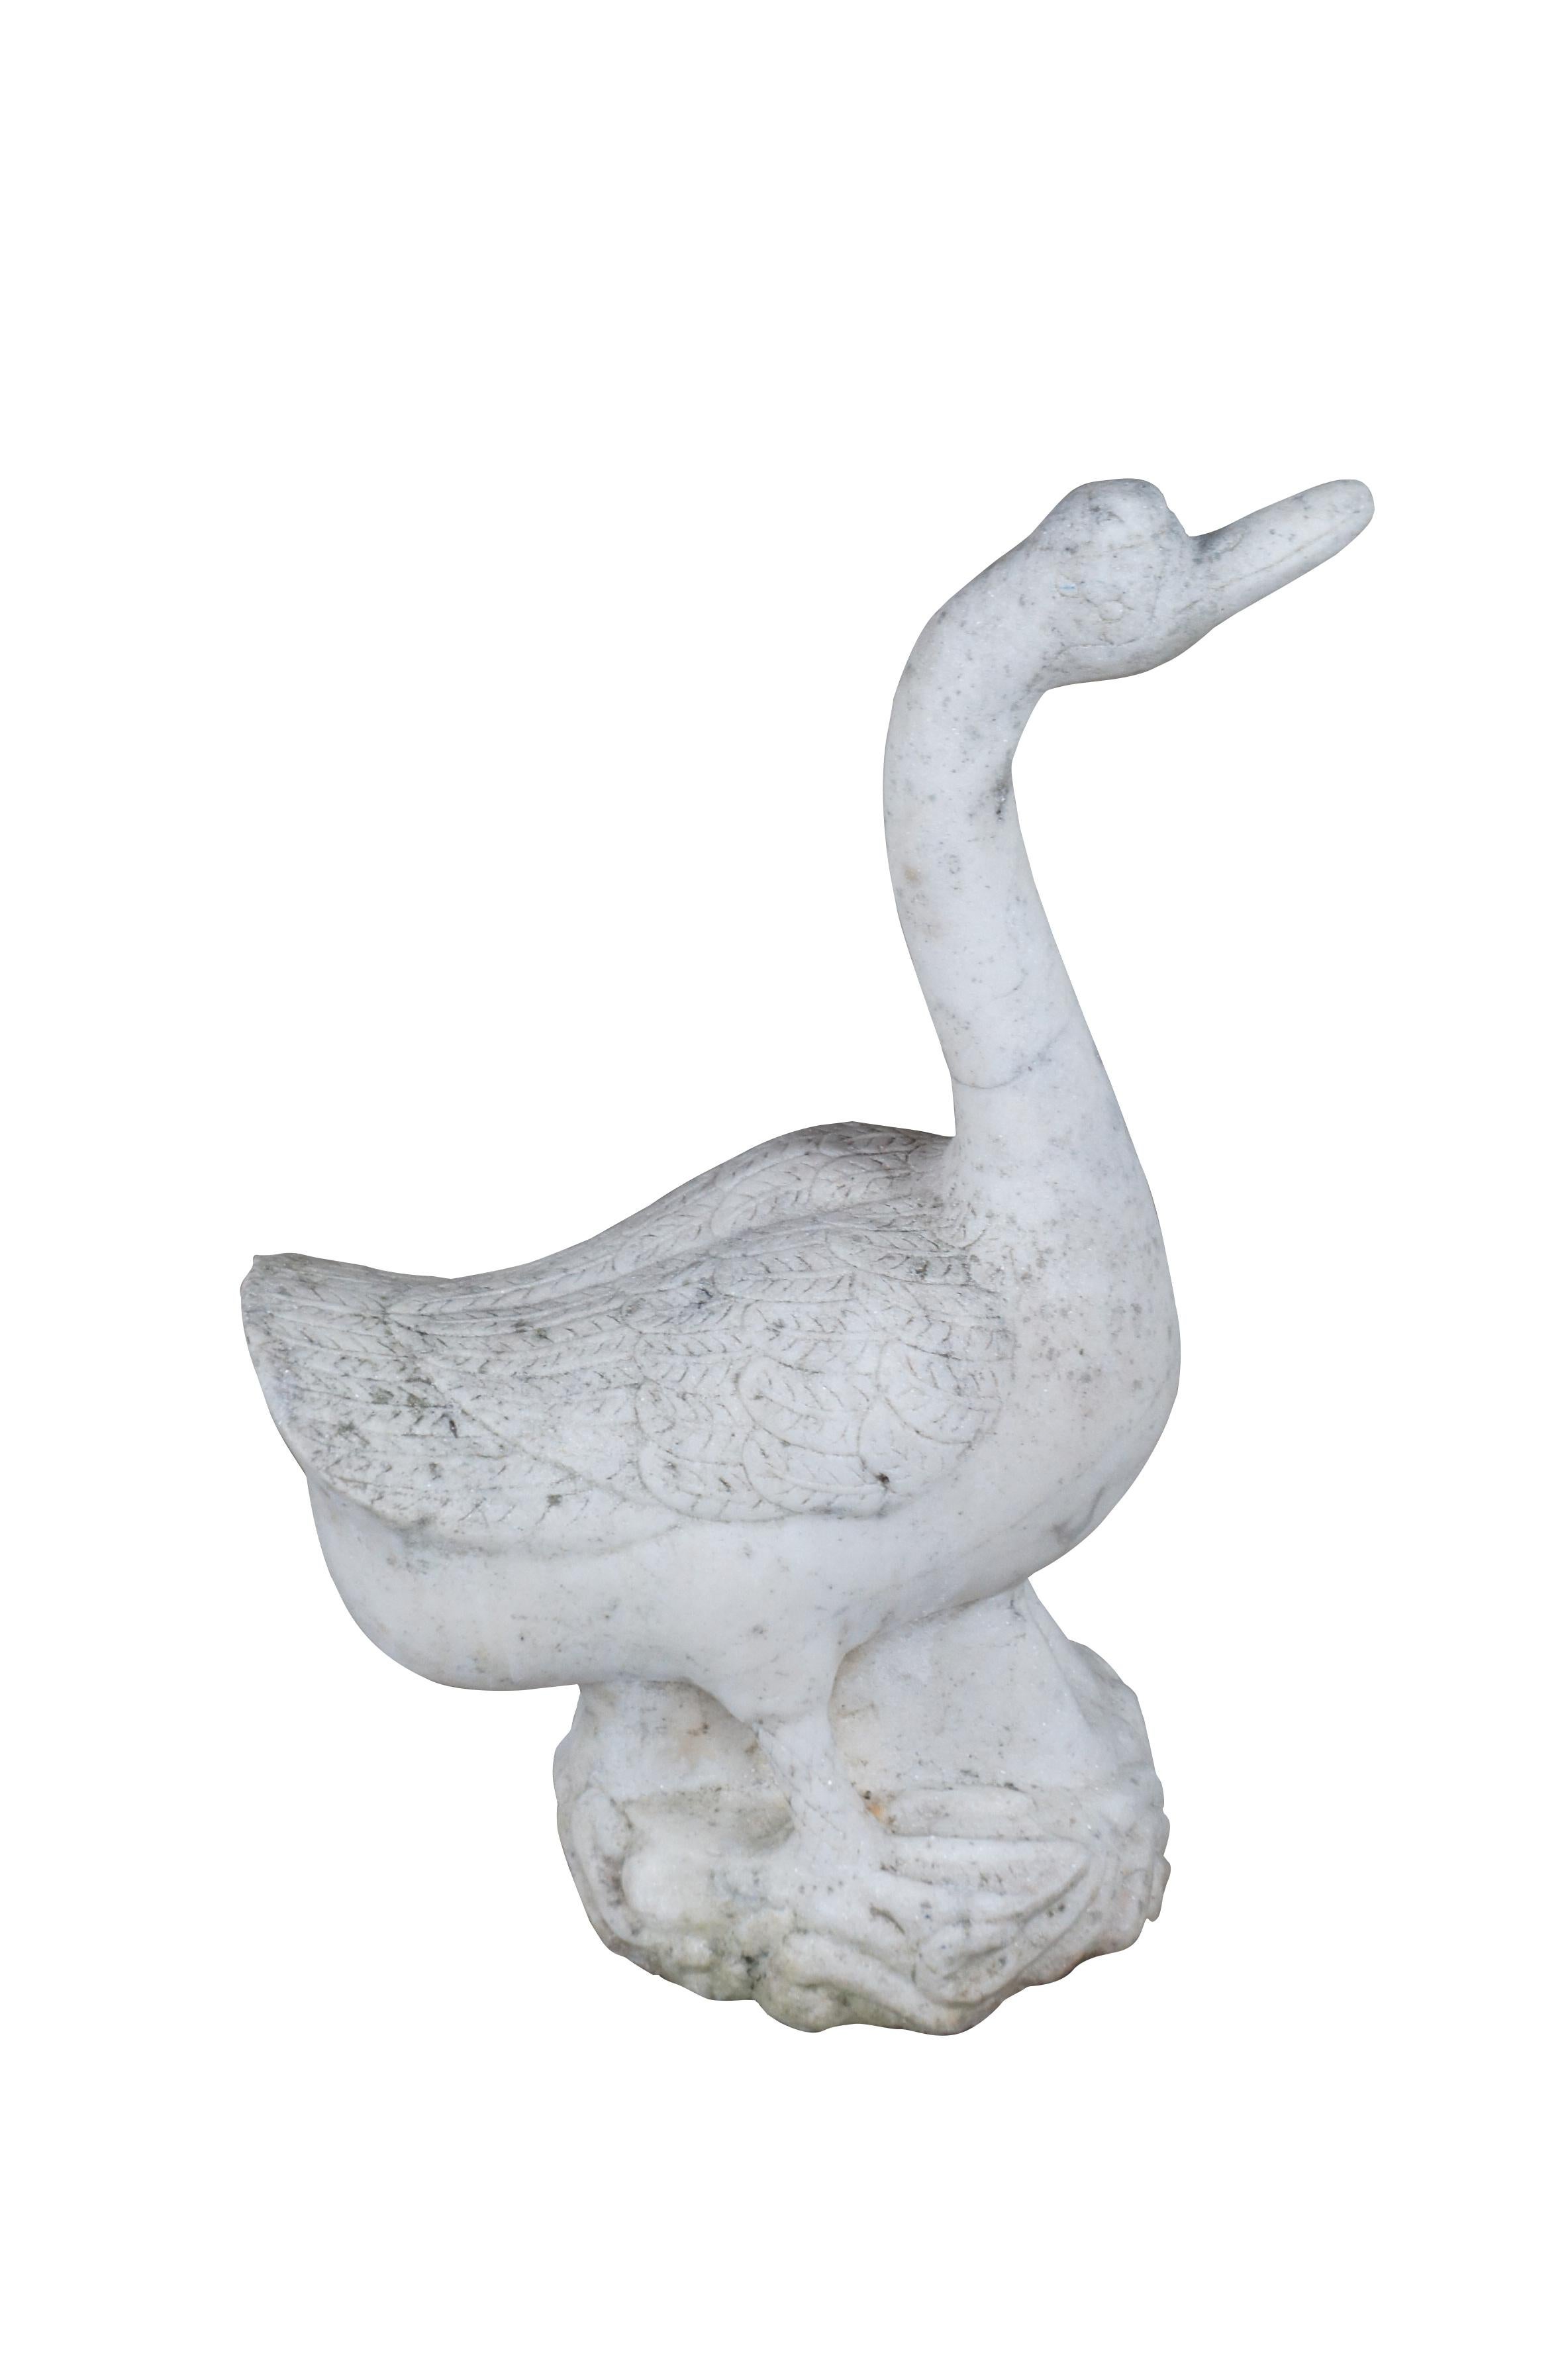 Heavy antique carved marble goose garden sculpture.  Made in Italy circa 1930s.

Dimensions:
24.5